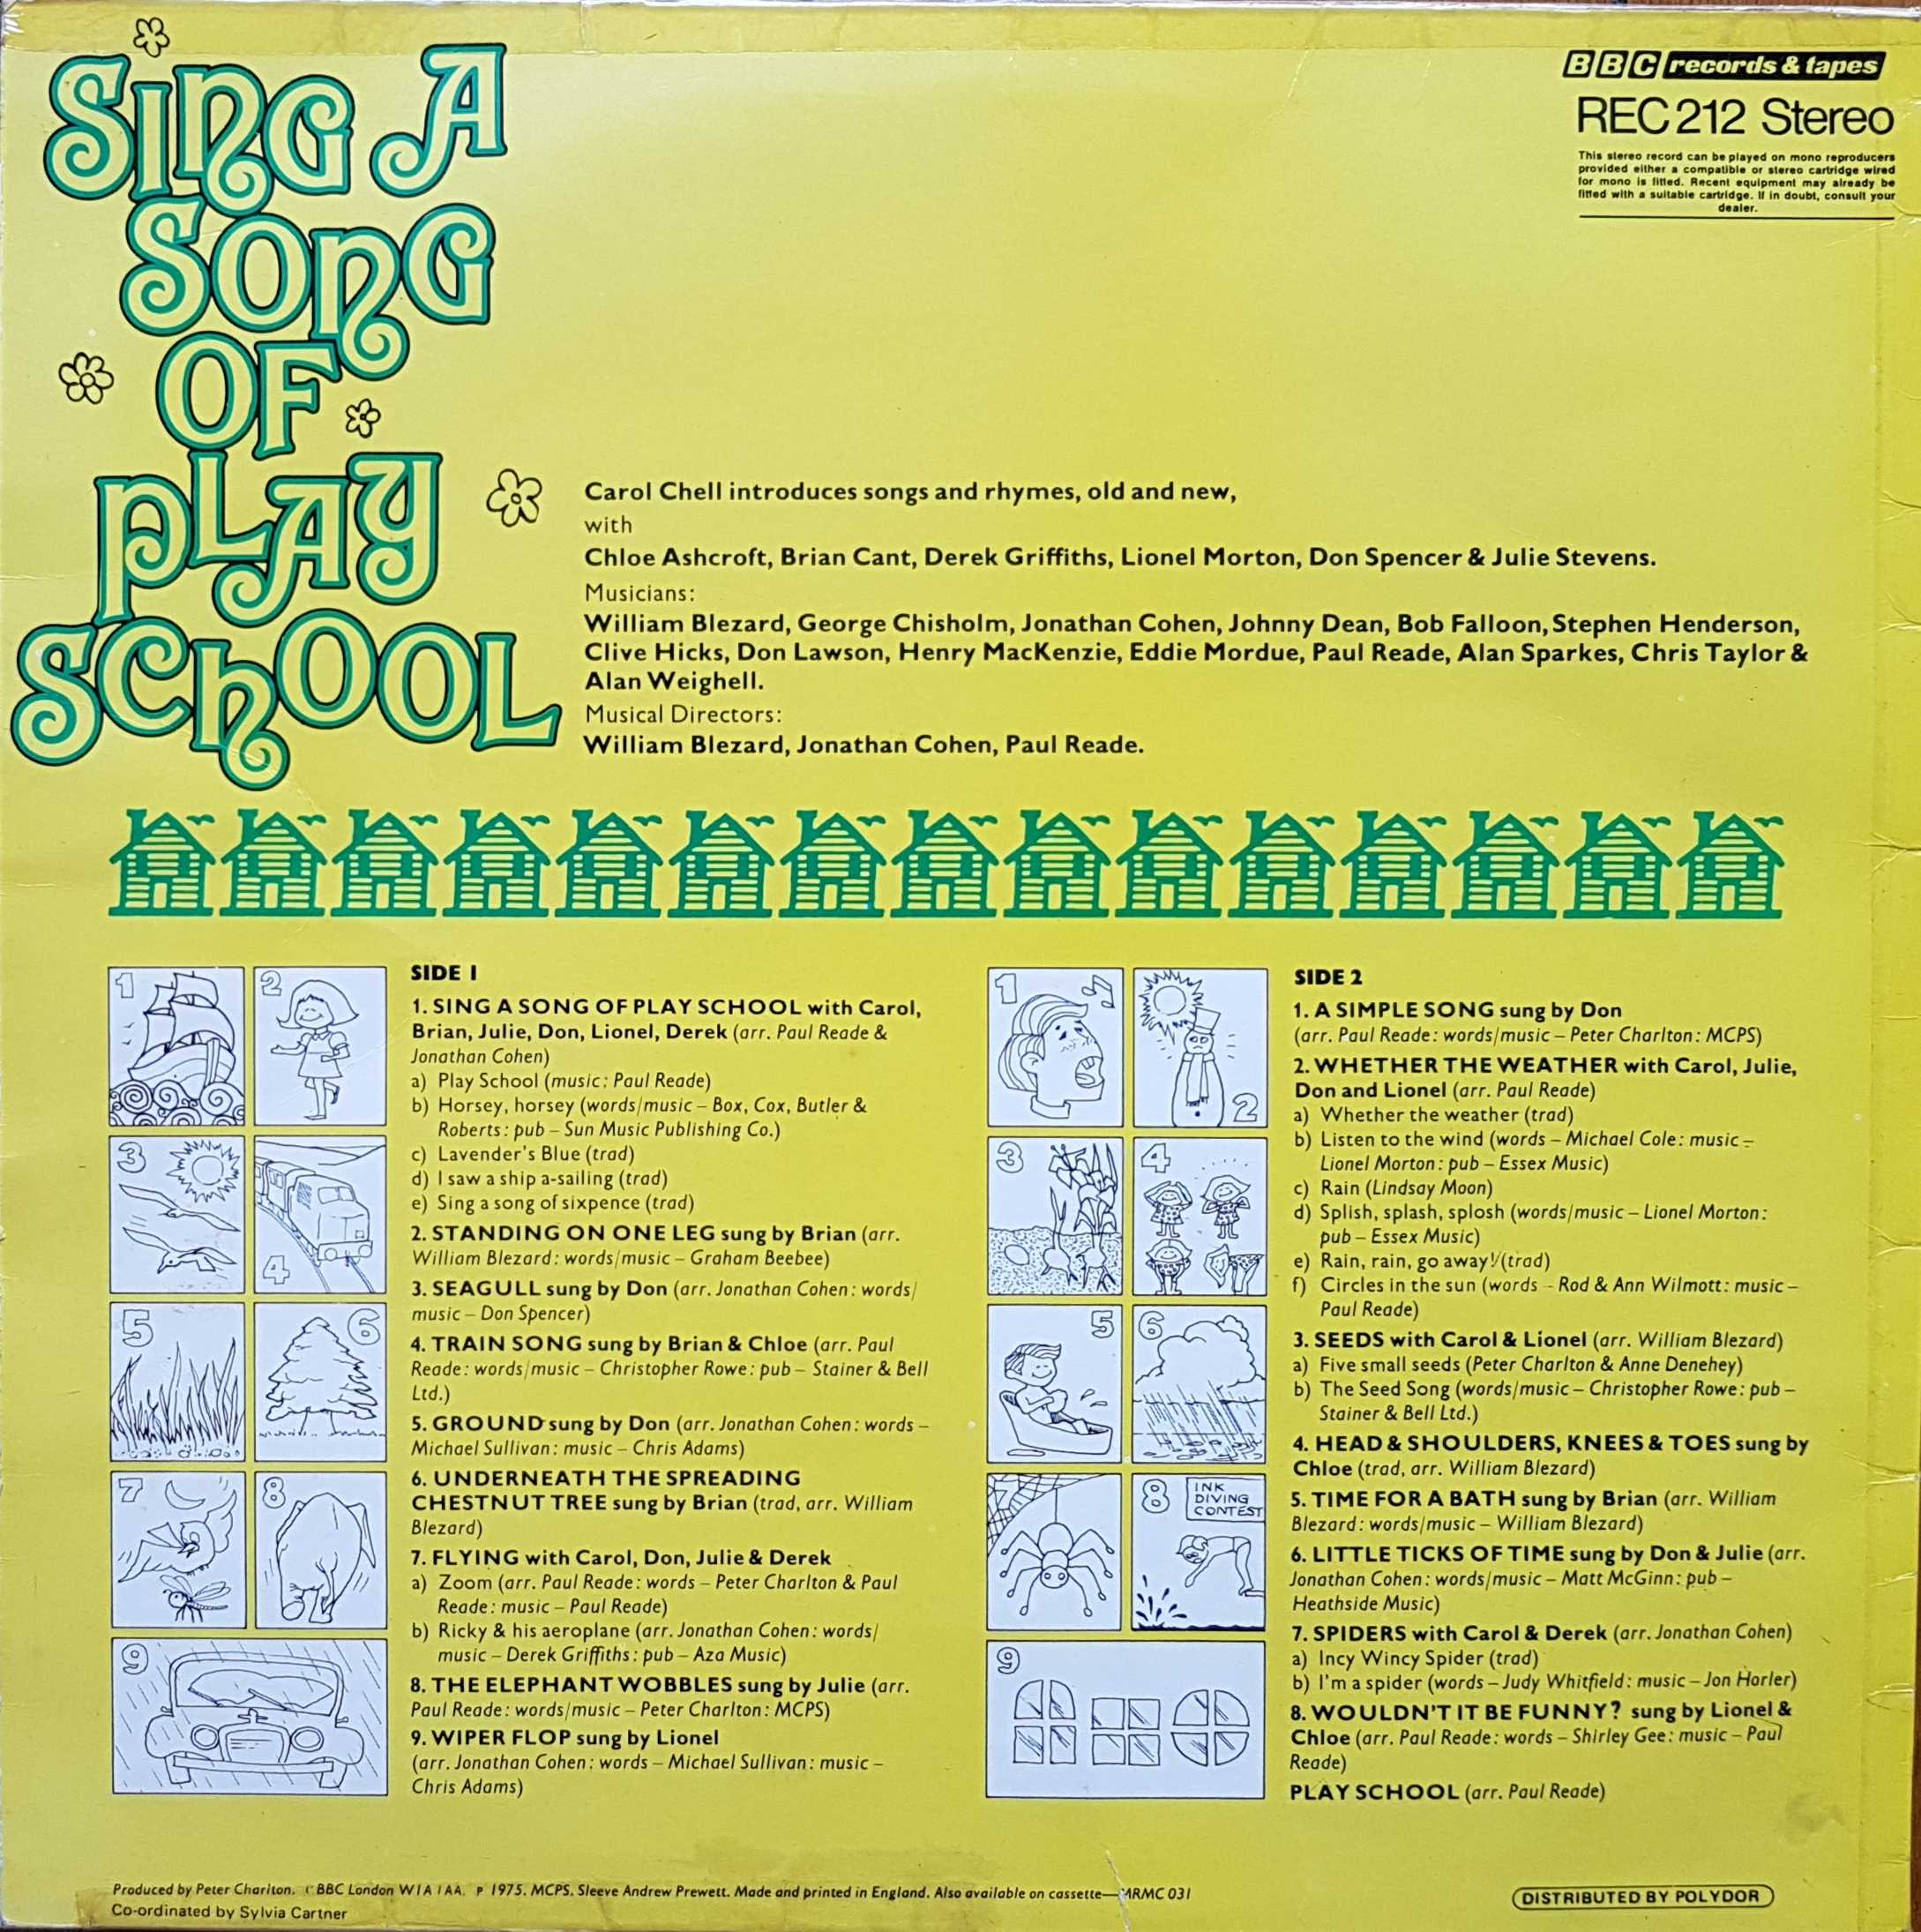 Picture of REC 212 Sing a song of play school by artist Carol Chell from the BBC records and Tapes library